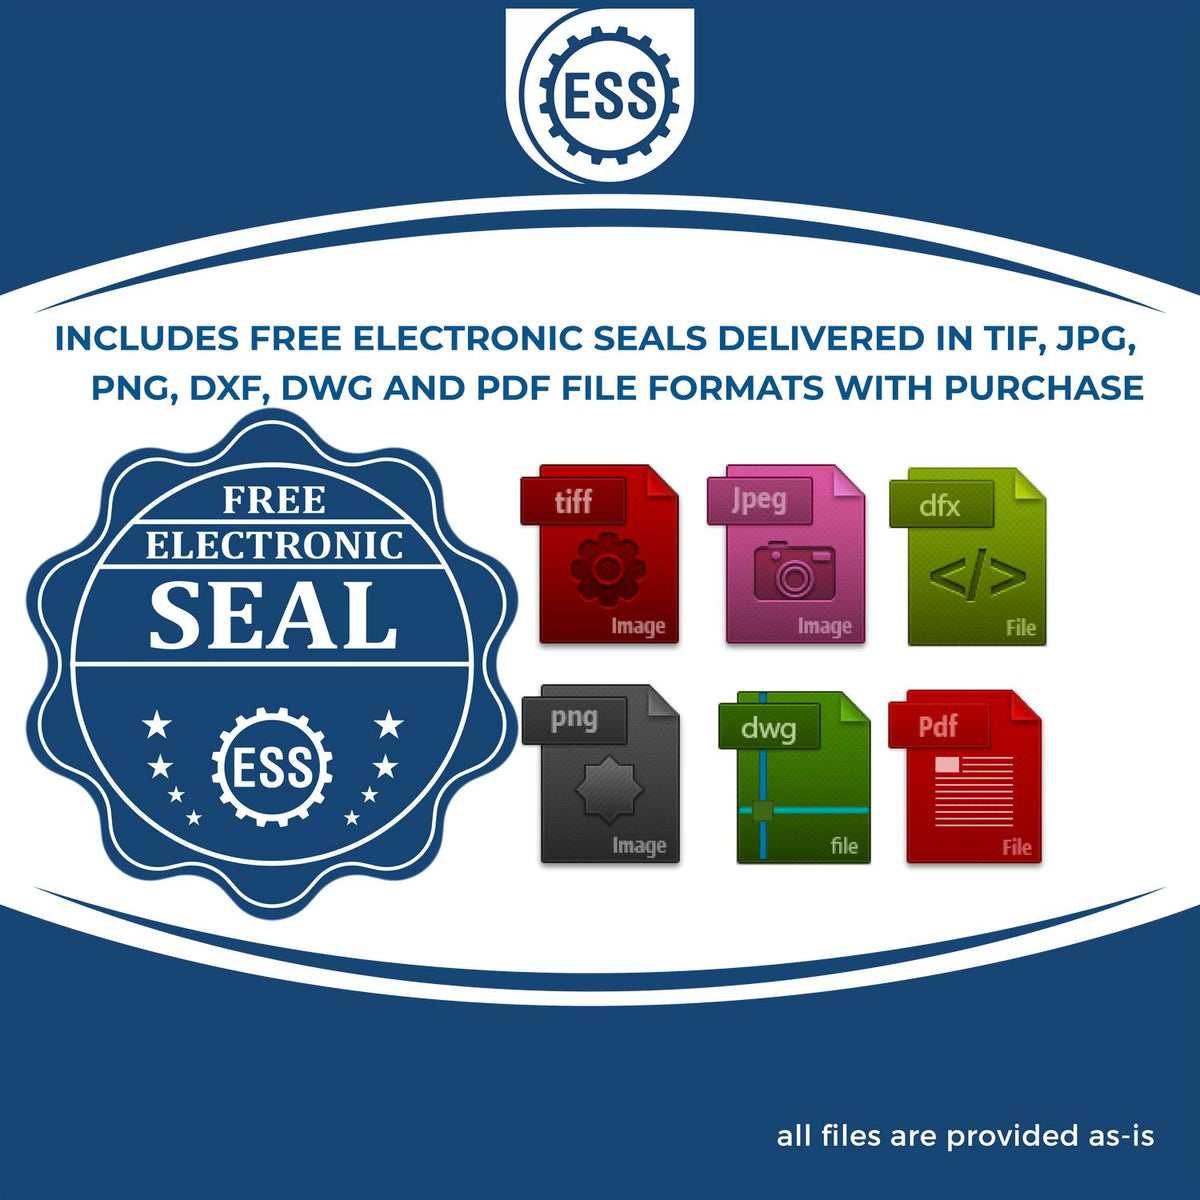 An infographic for the free electronic seal for the Self-Inking Louisiana PE Stamp illustrating the different file type icons such as DXF, DWG, TIF, JPG and PNG.